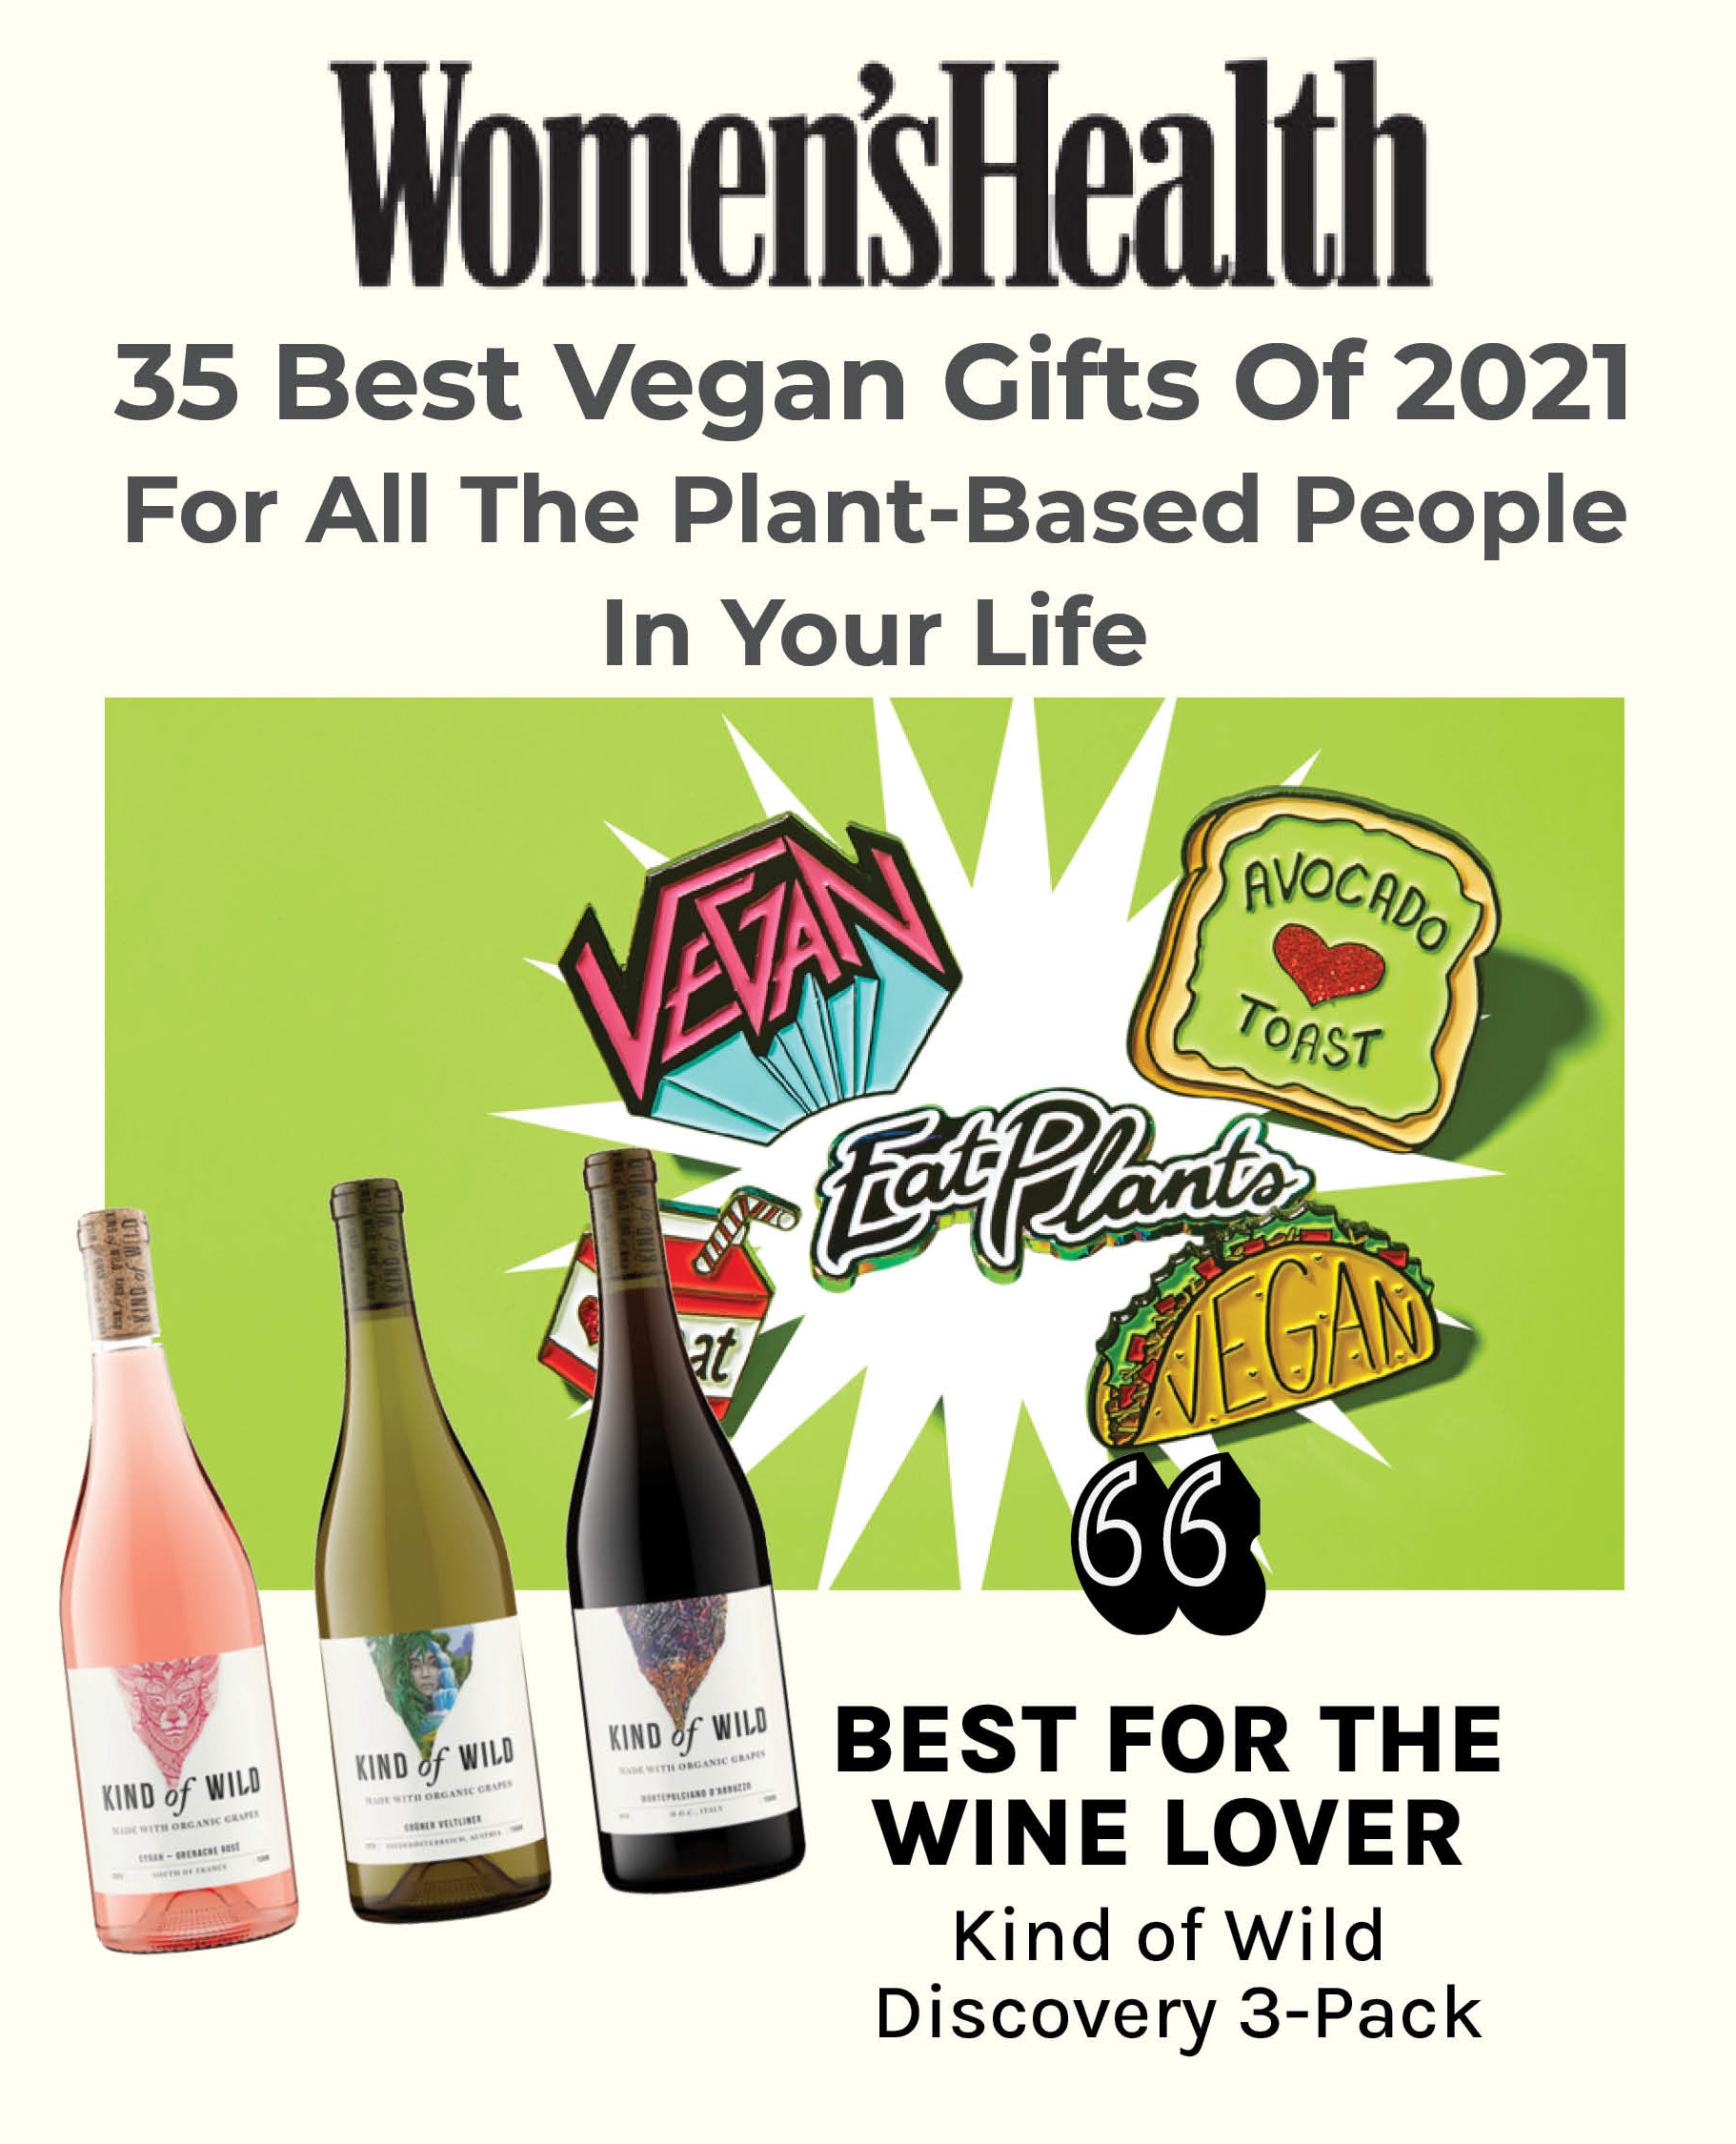 Best Vegan Gifts Of 2021 For All The Plant-Based People – Women’s Health Magazine